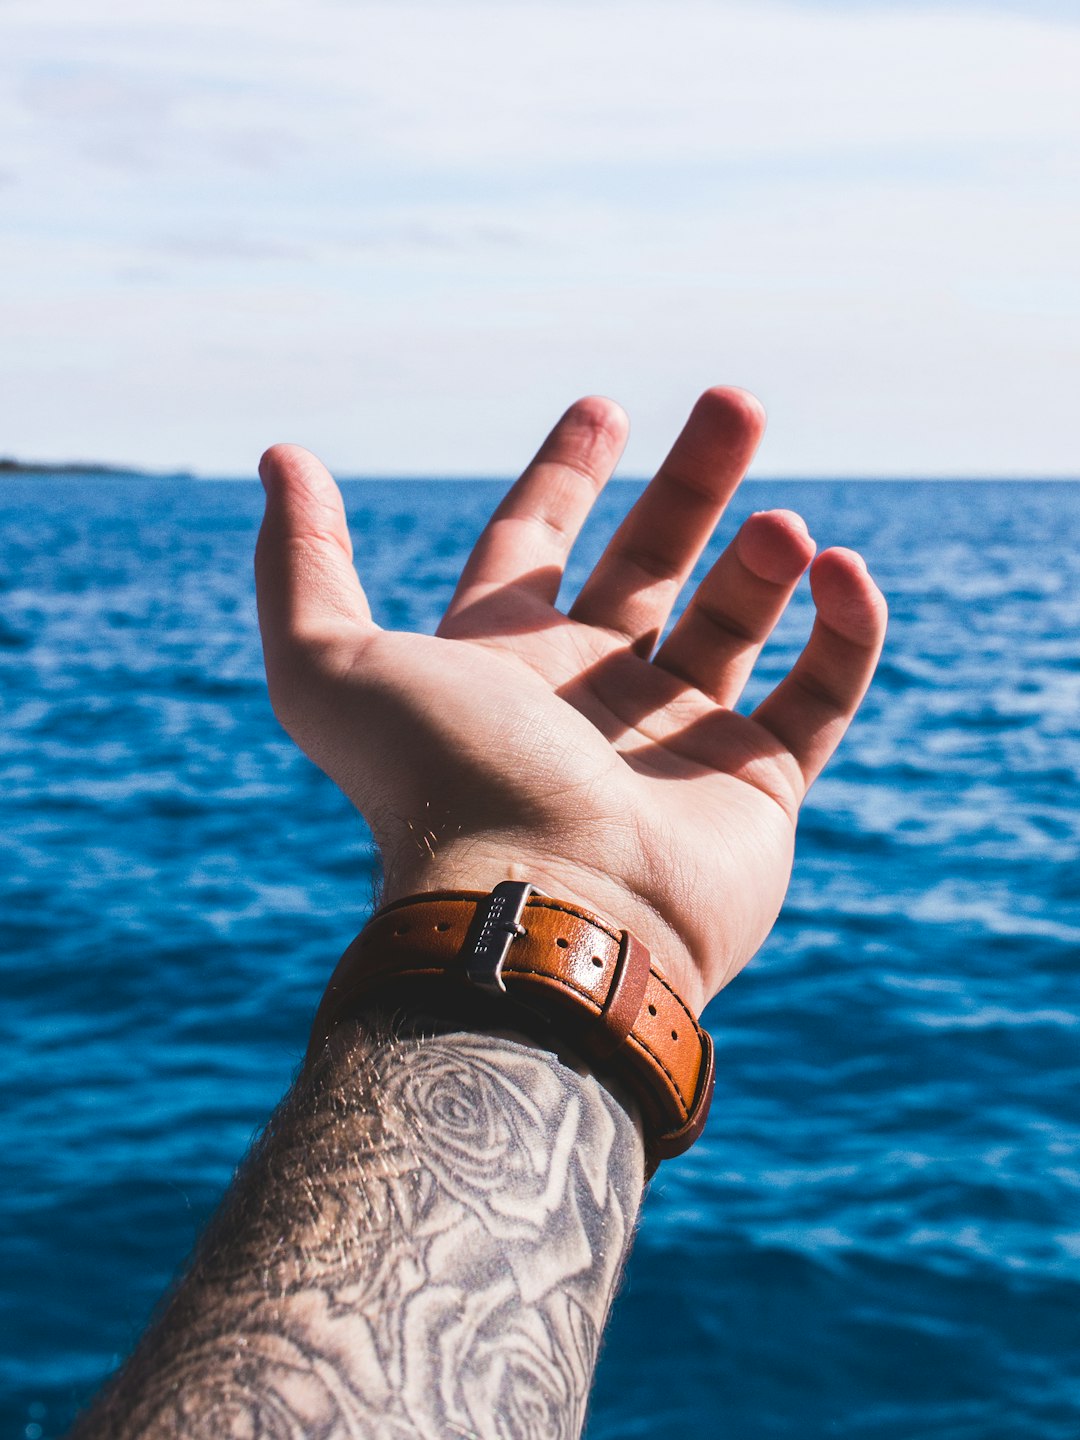 person with arm sleeved tattoo wearing brown leather strap watch holding out hand above water